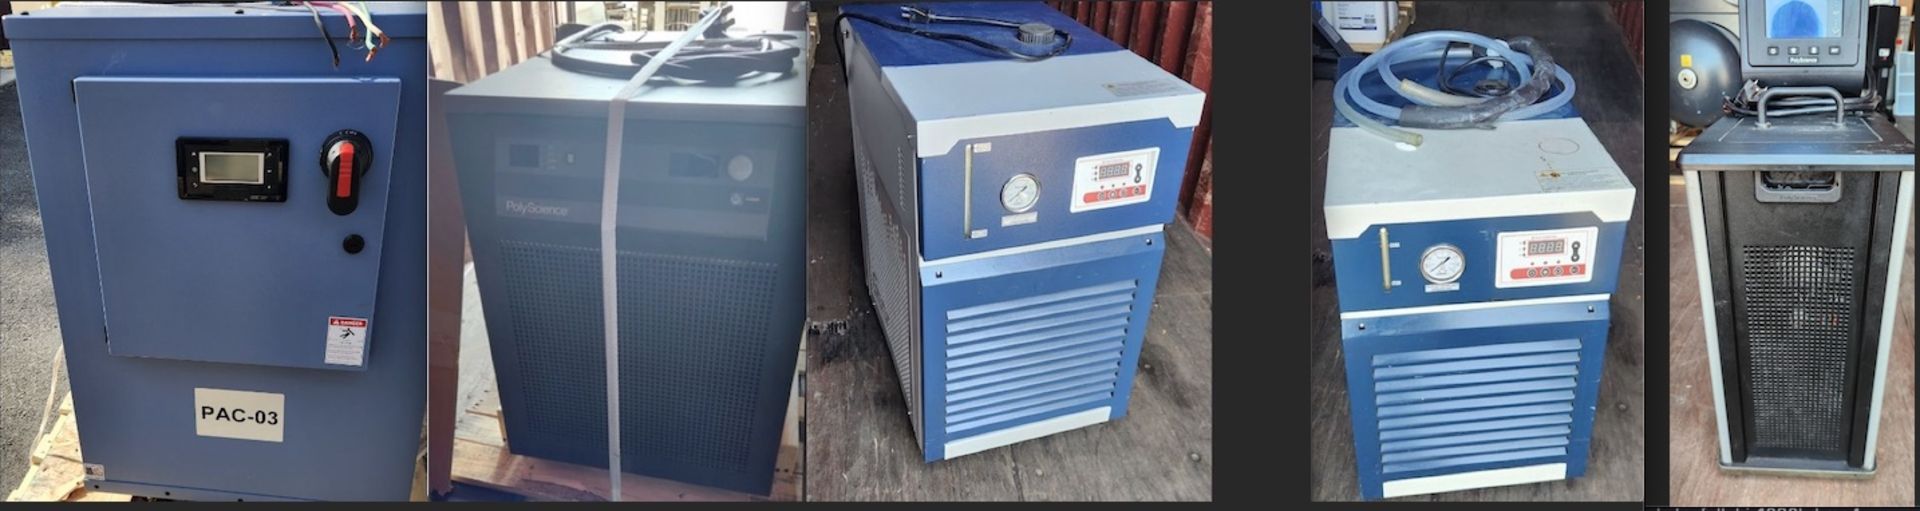 Lot of (5) Used Chillers: (2) PolyScience, (2) Across International (1) Pacific Combustion